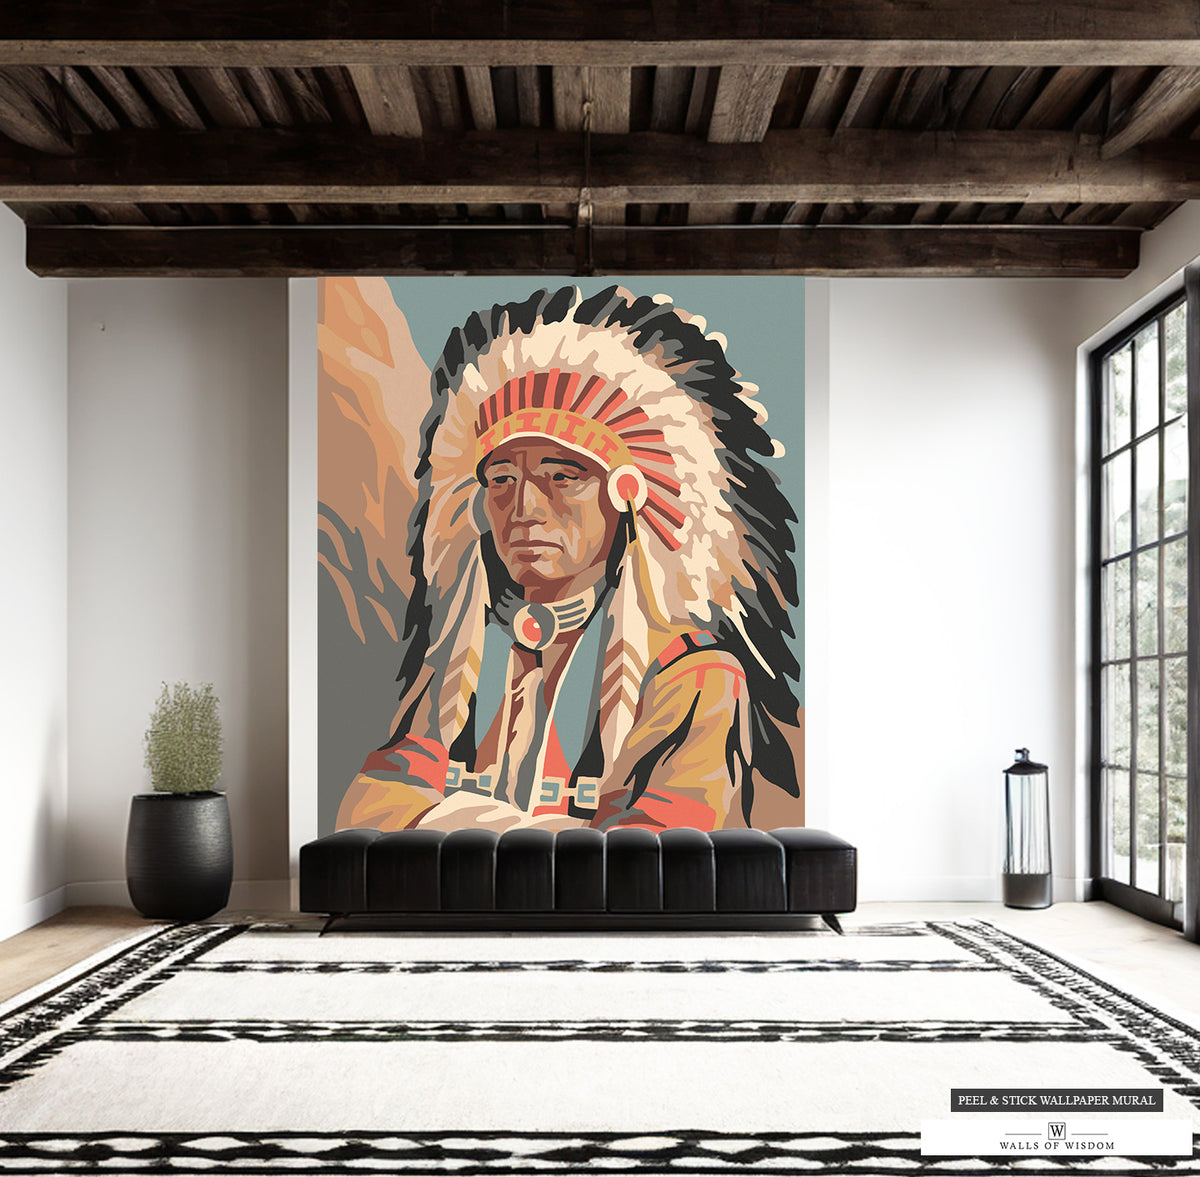 Large Wall Art featuring Paint-by-Numbers Style Native American Headdress.